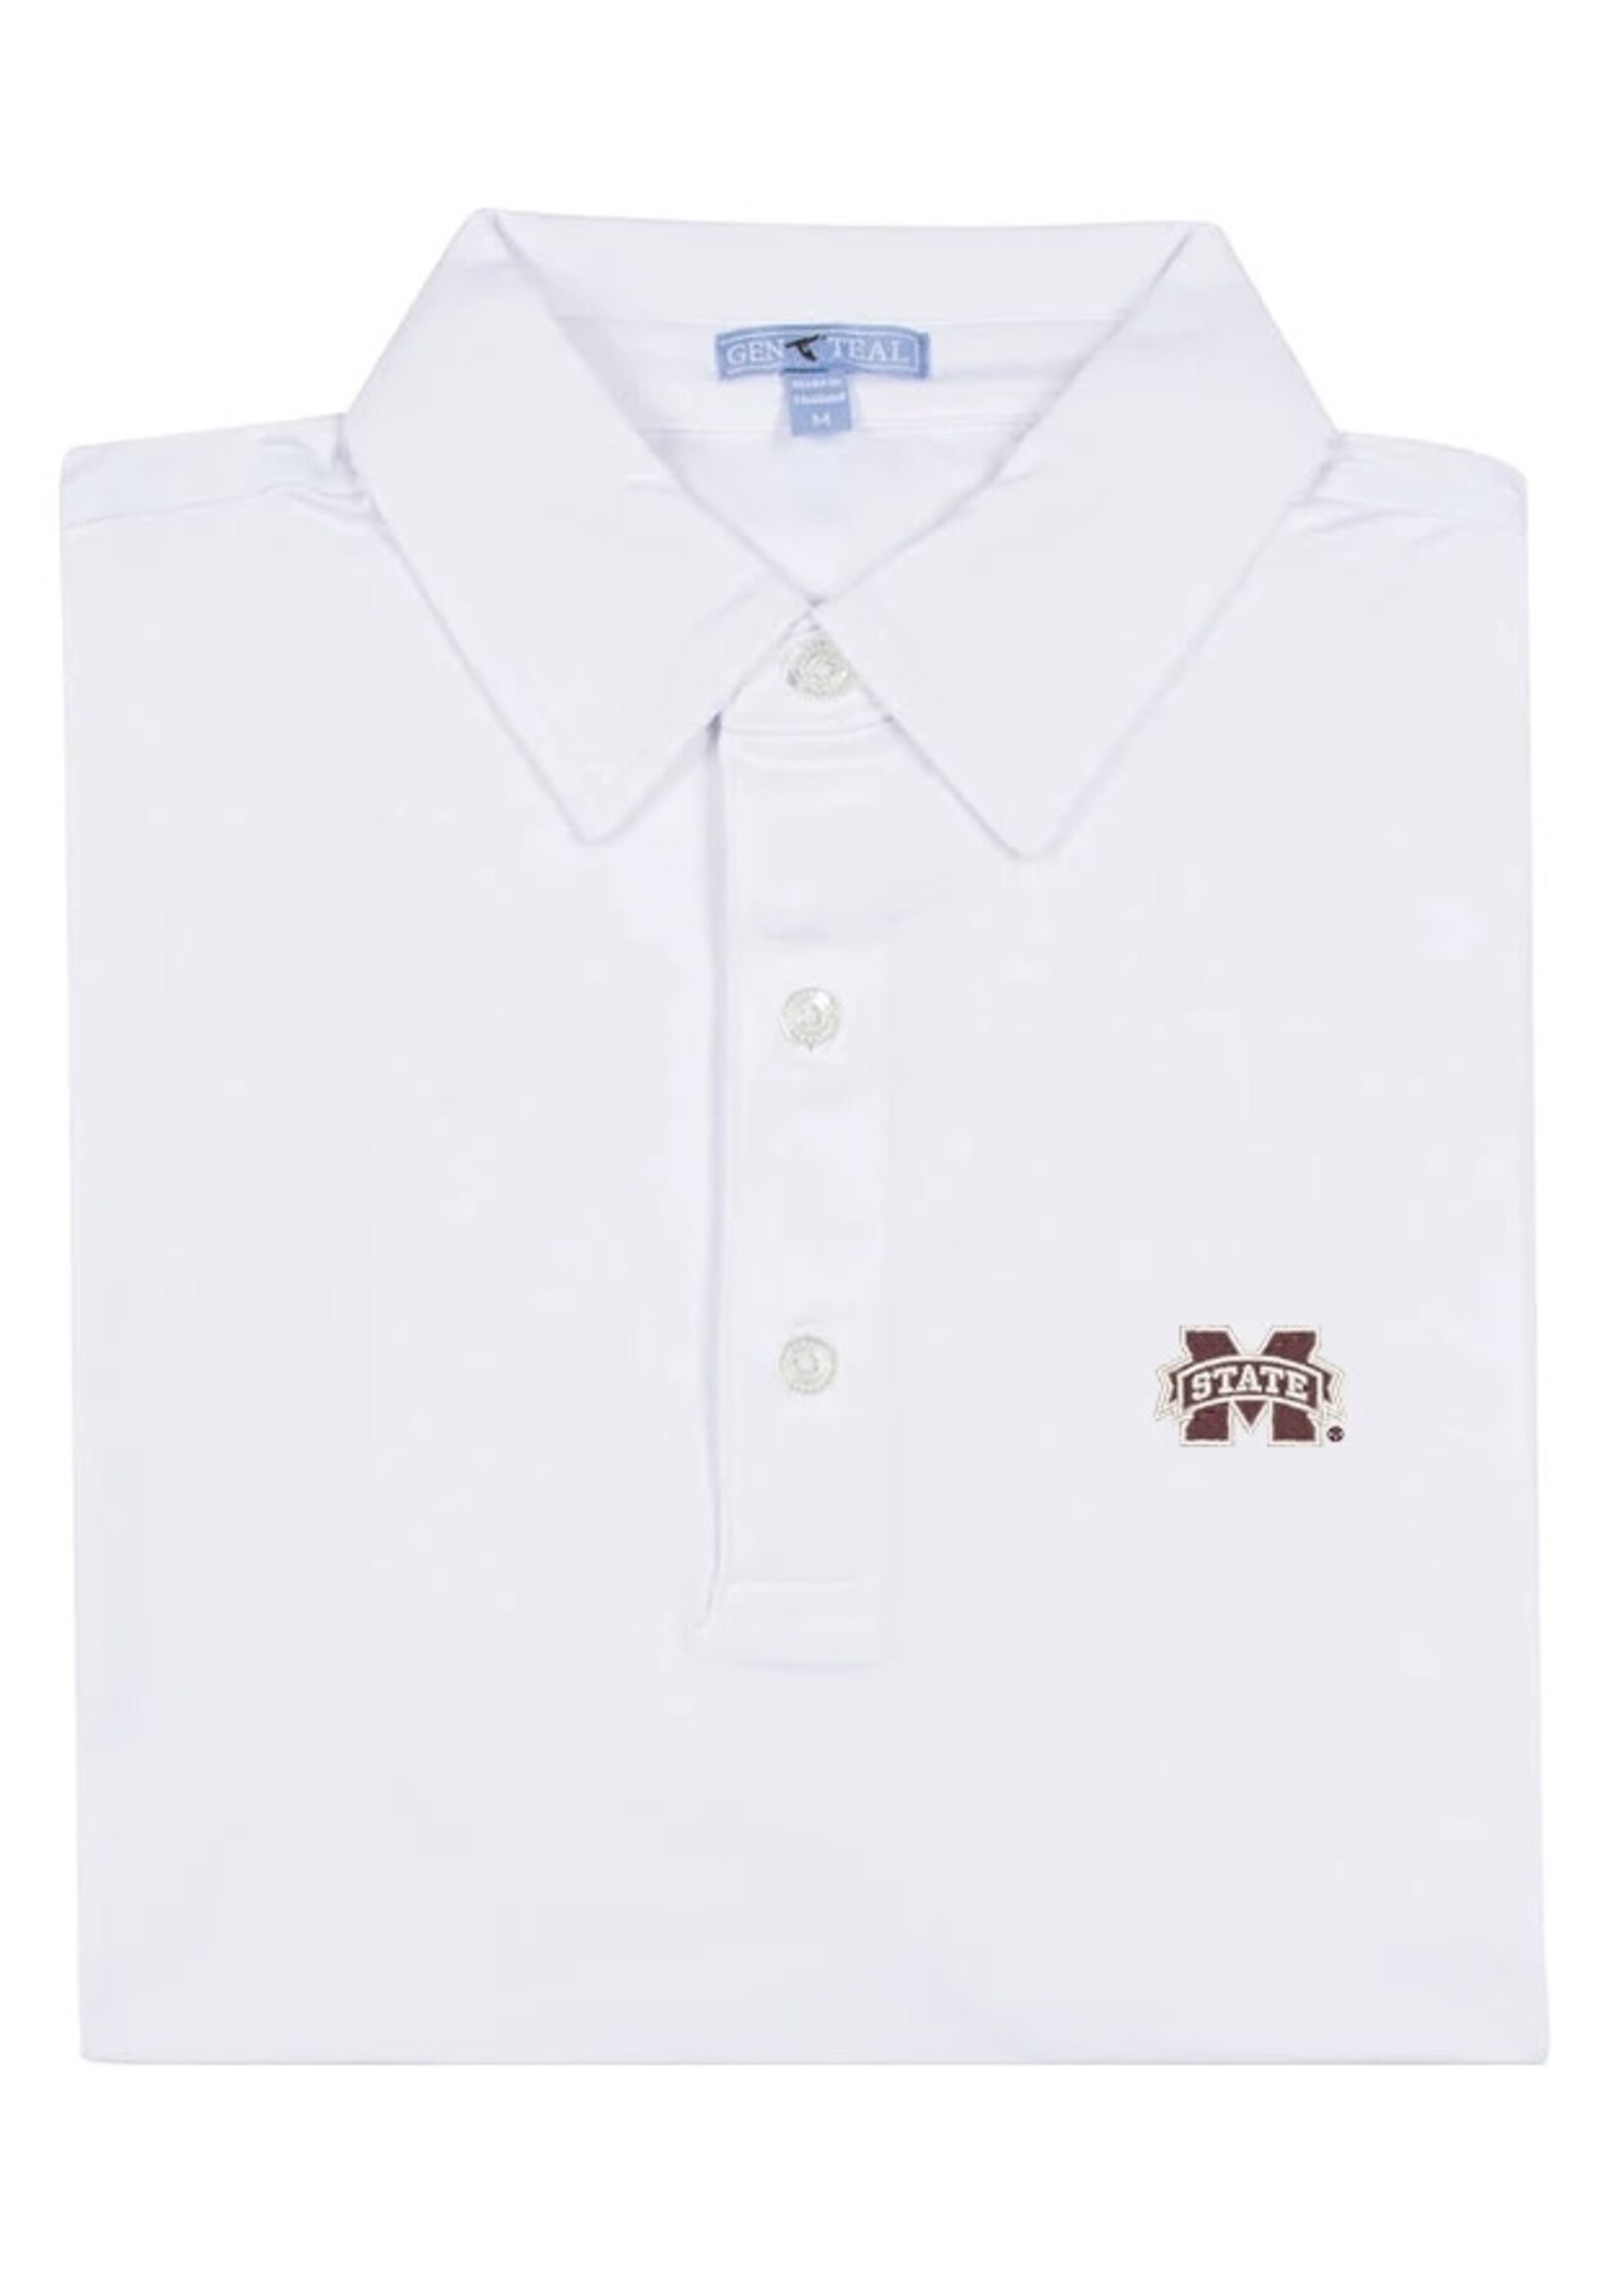 GenTeal Apparel Mississippi State White Performance Polo